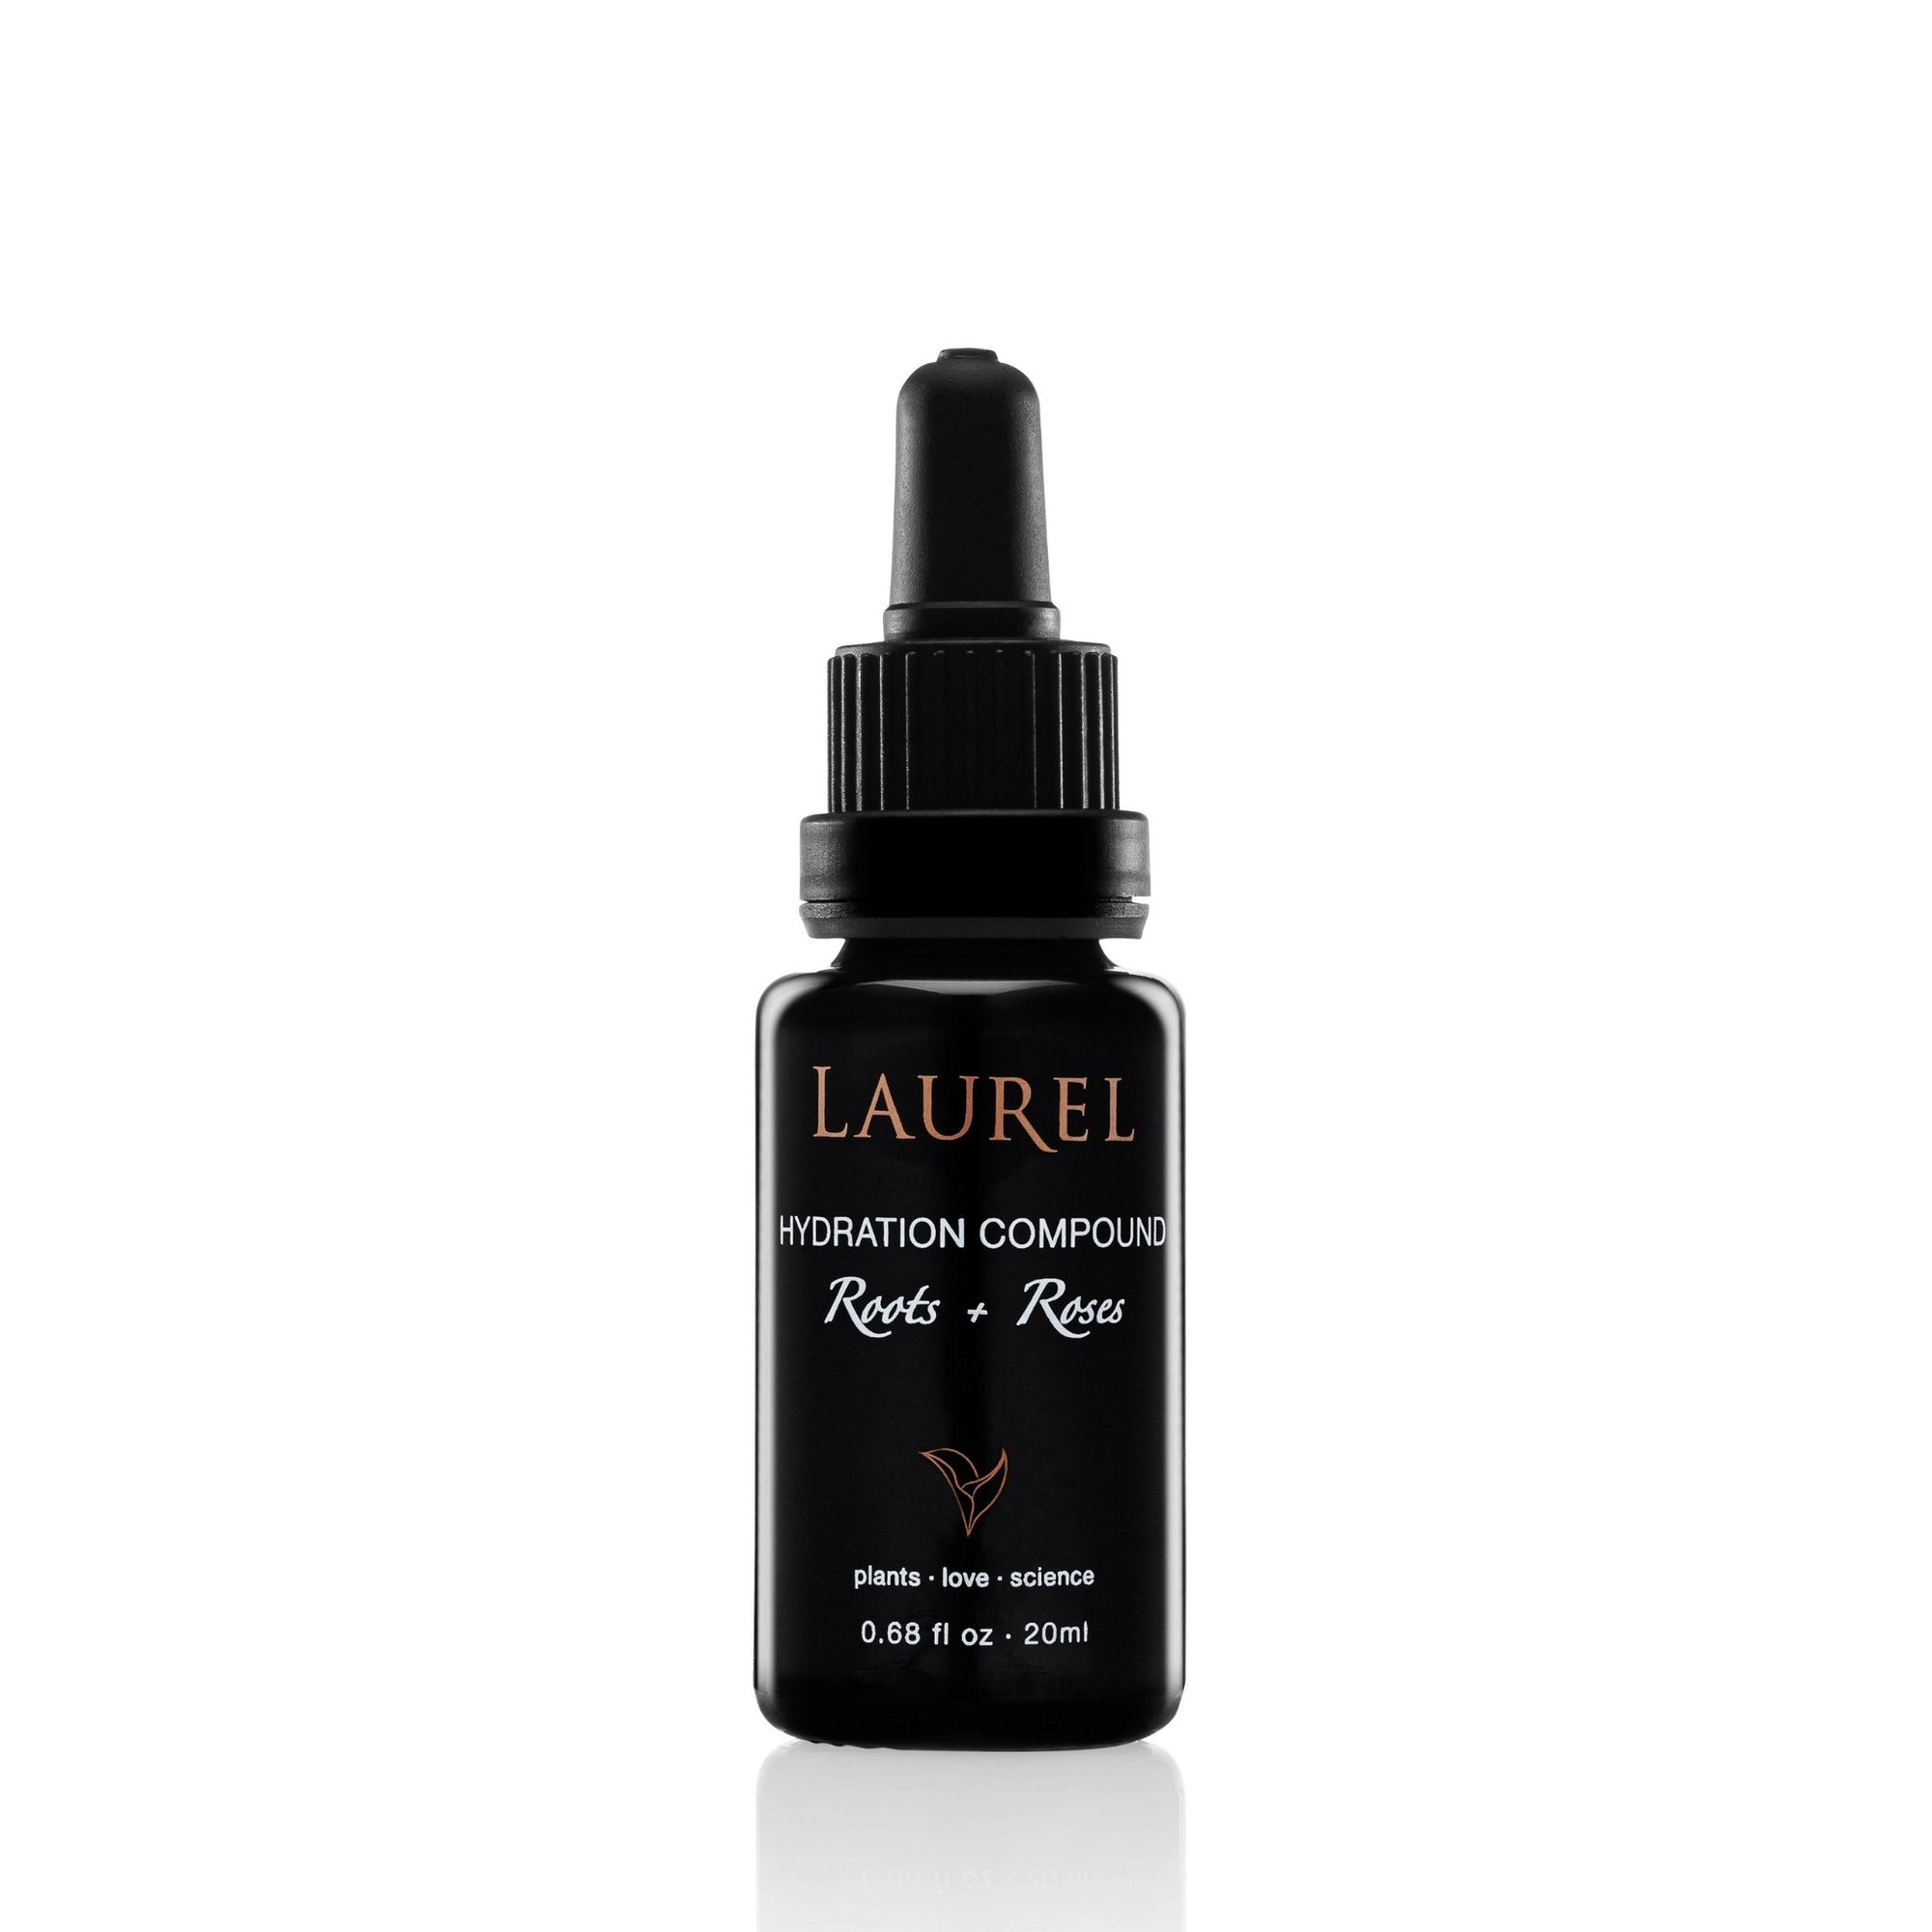 Laurel Skin - Laurel Hydration Compound Roots + Roses - ORESTA clean beauty simplified